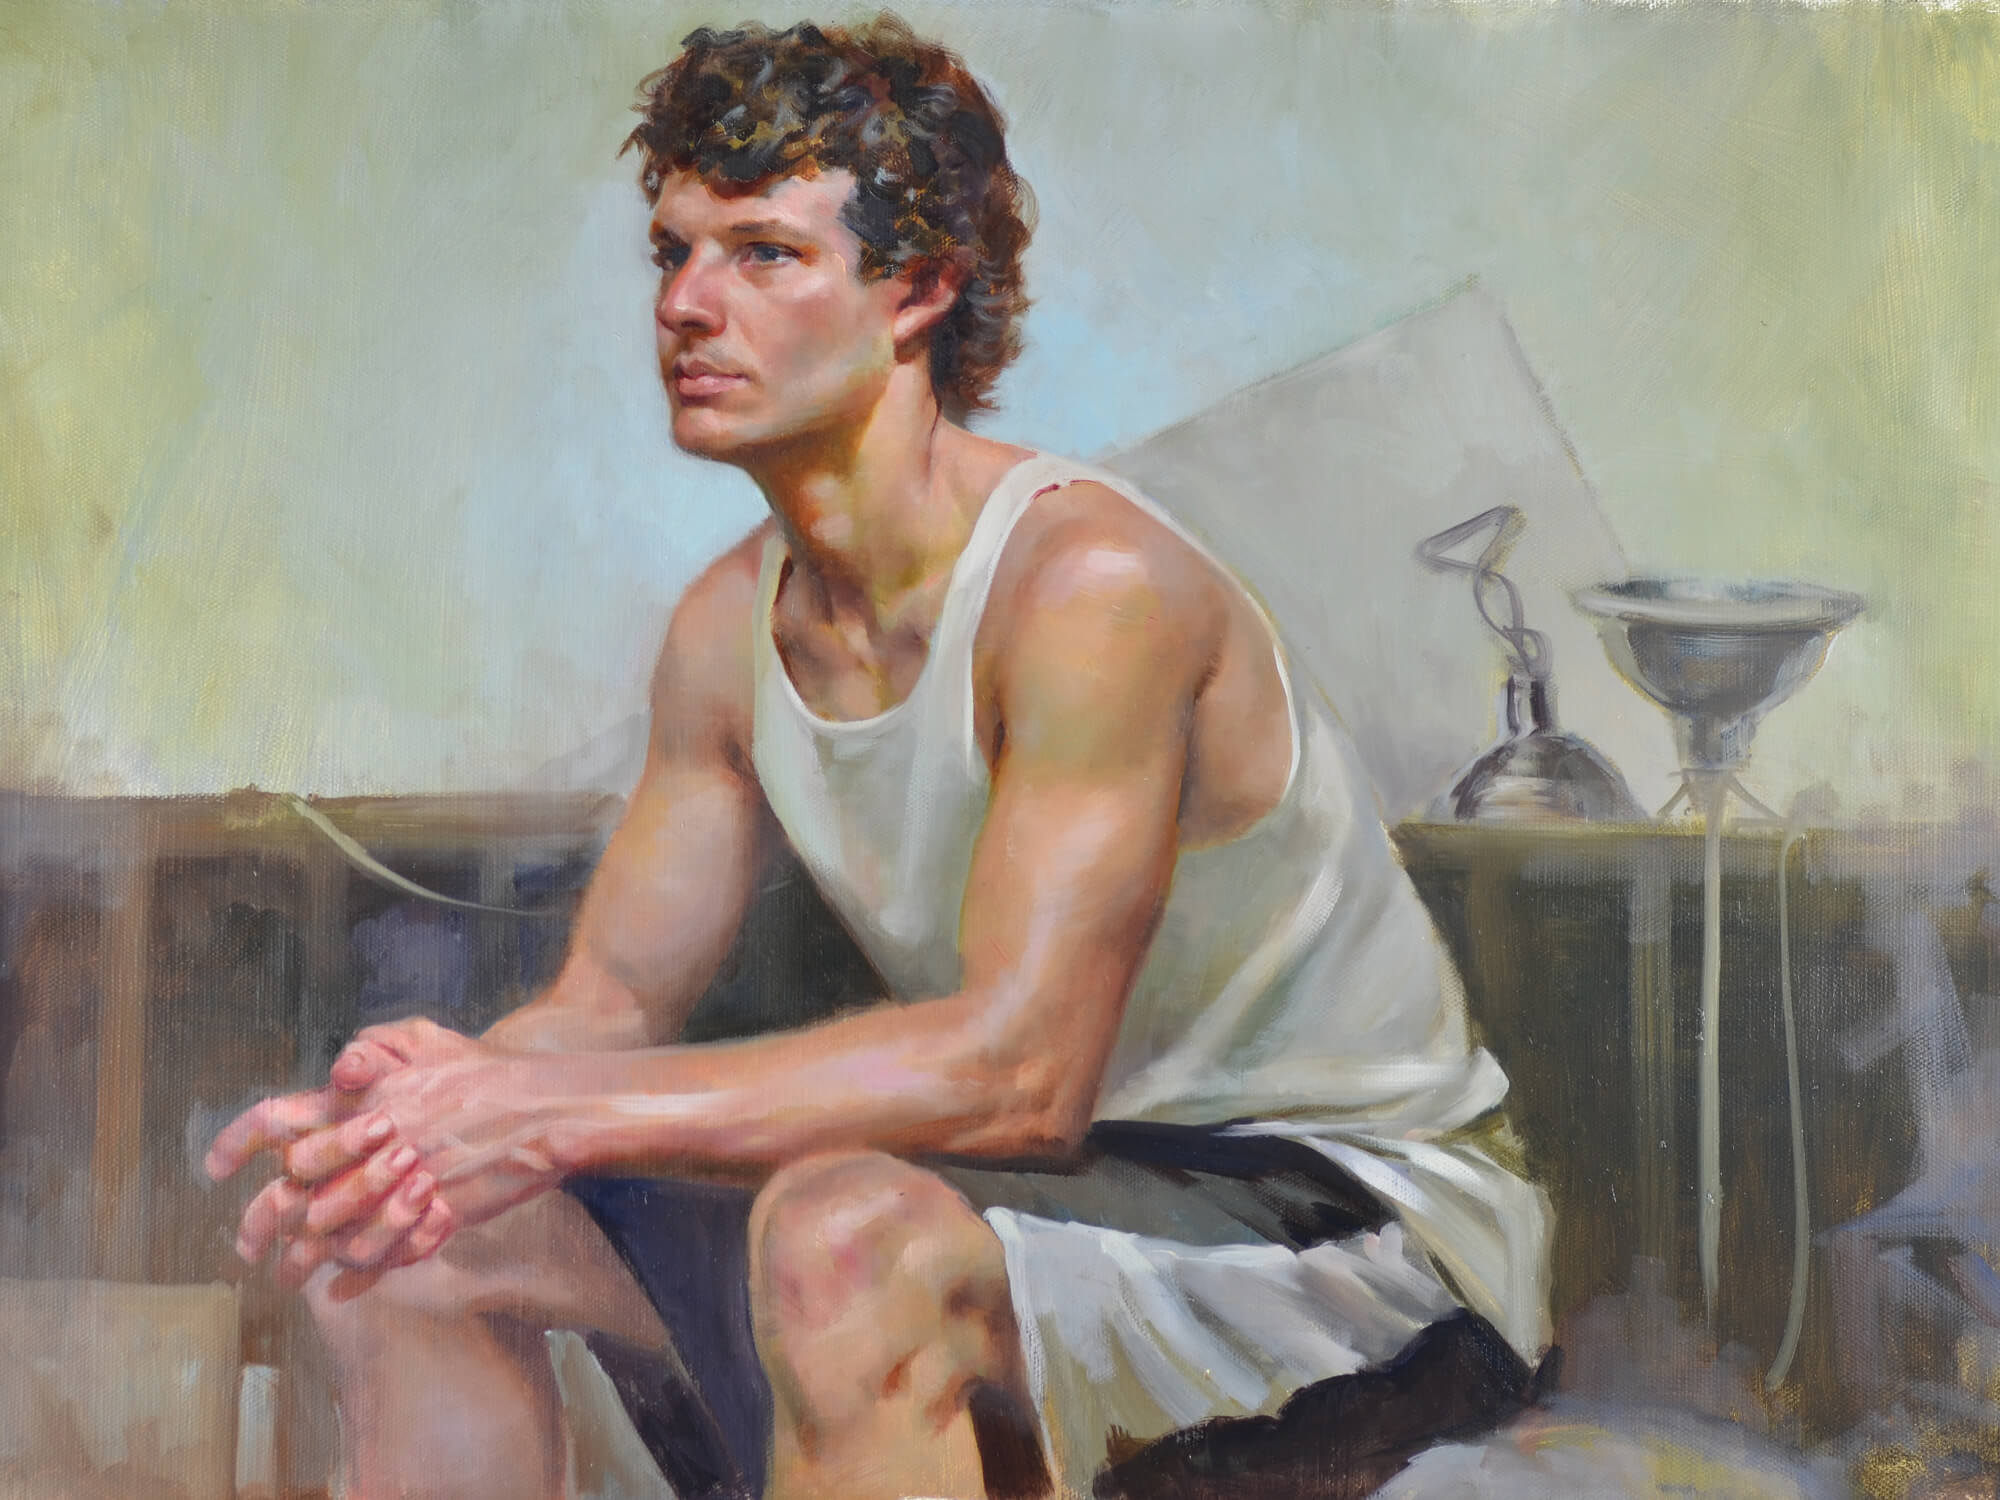 Figurative oil portrait of a young man wearing a muscle t-shirt and shorts sitting with his hands clasped and clamp lights behind him